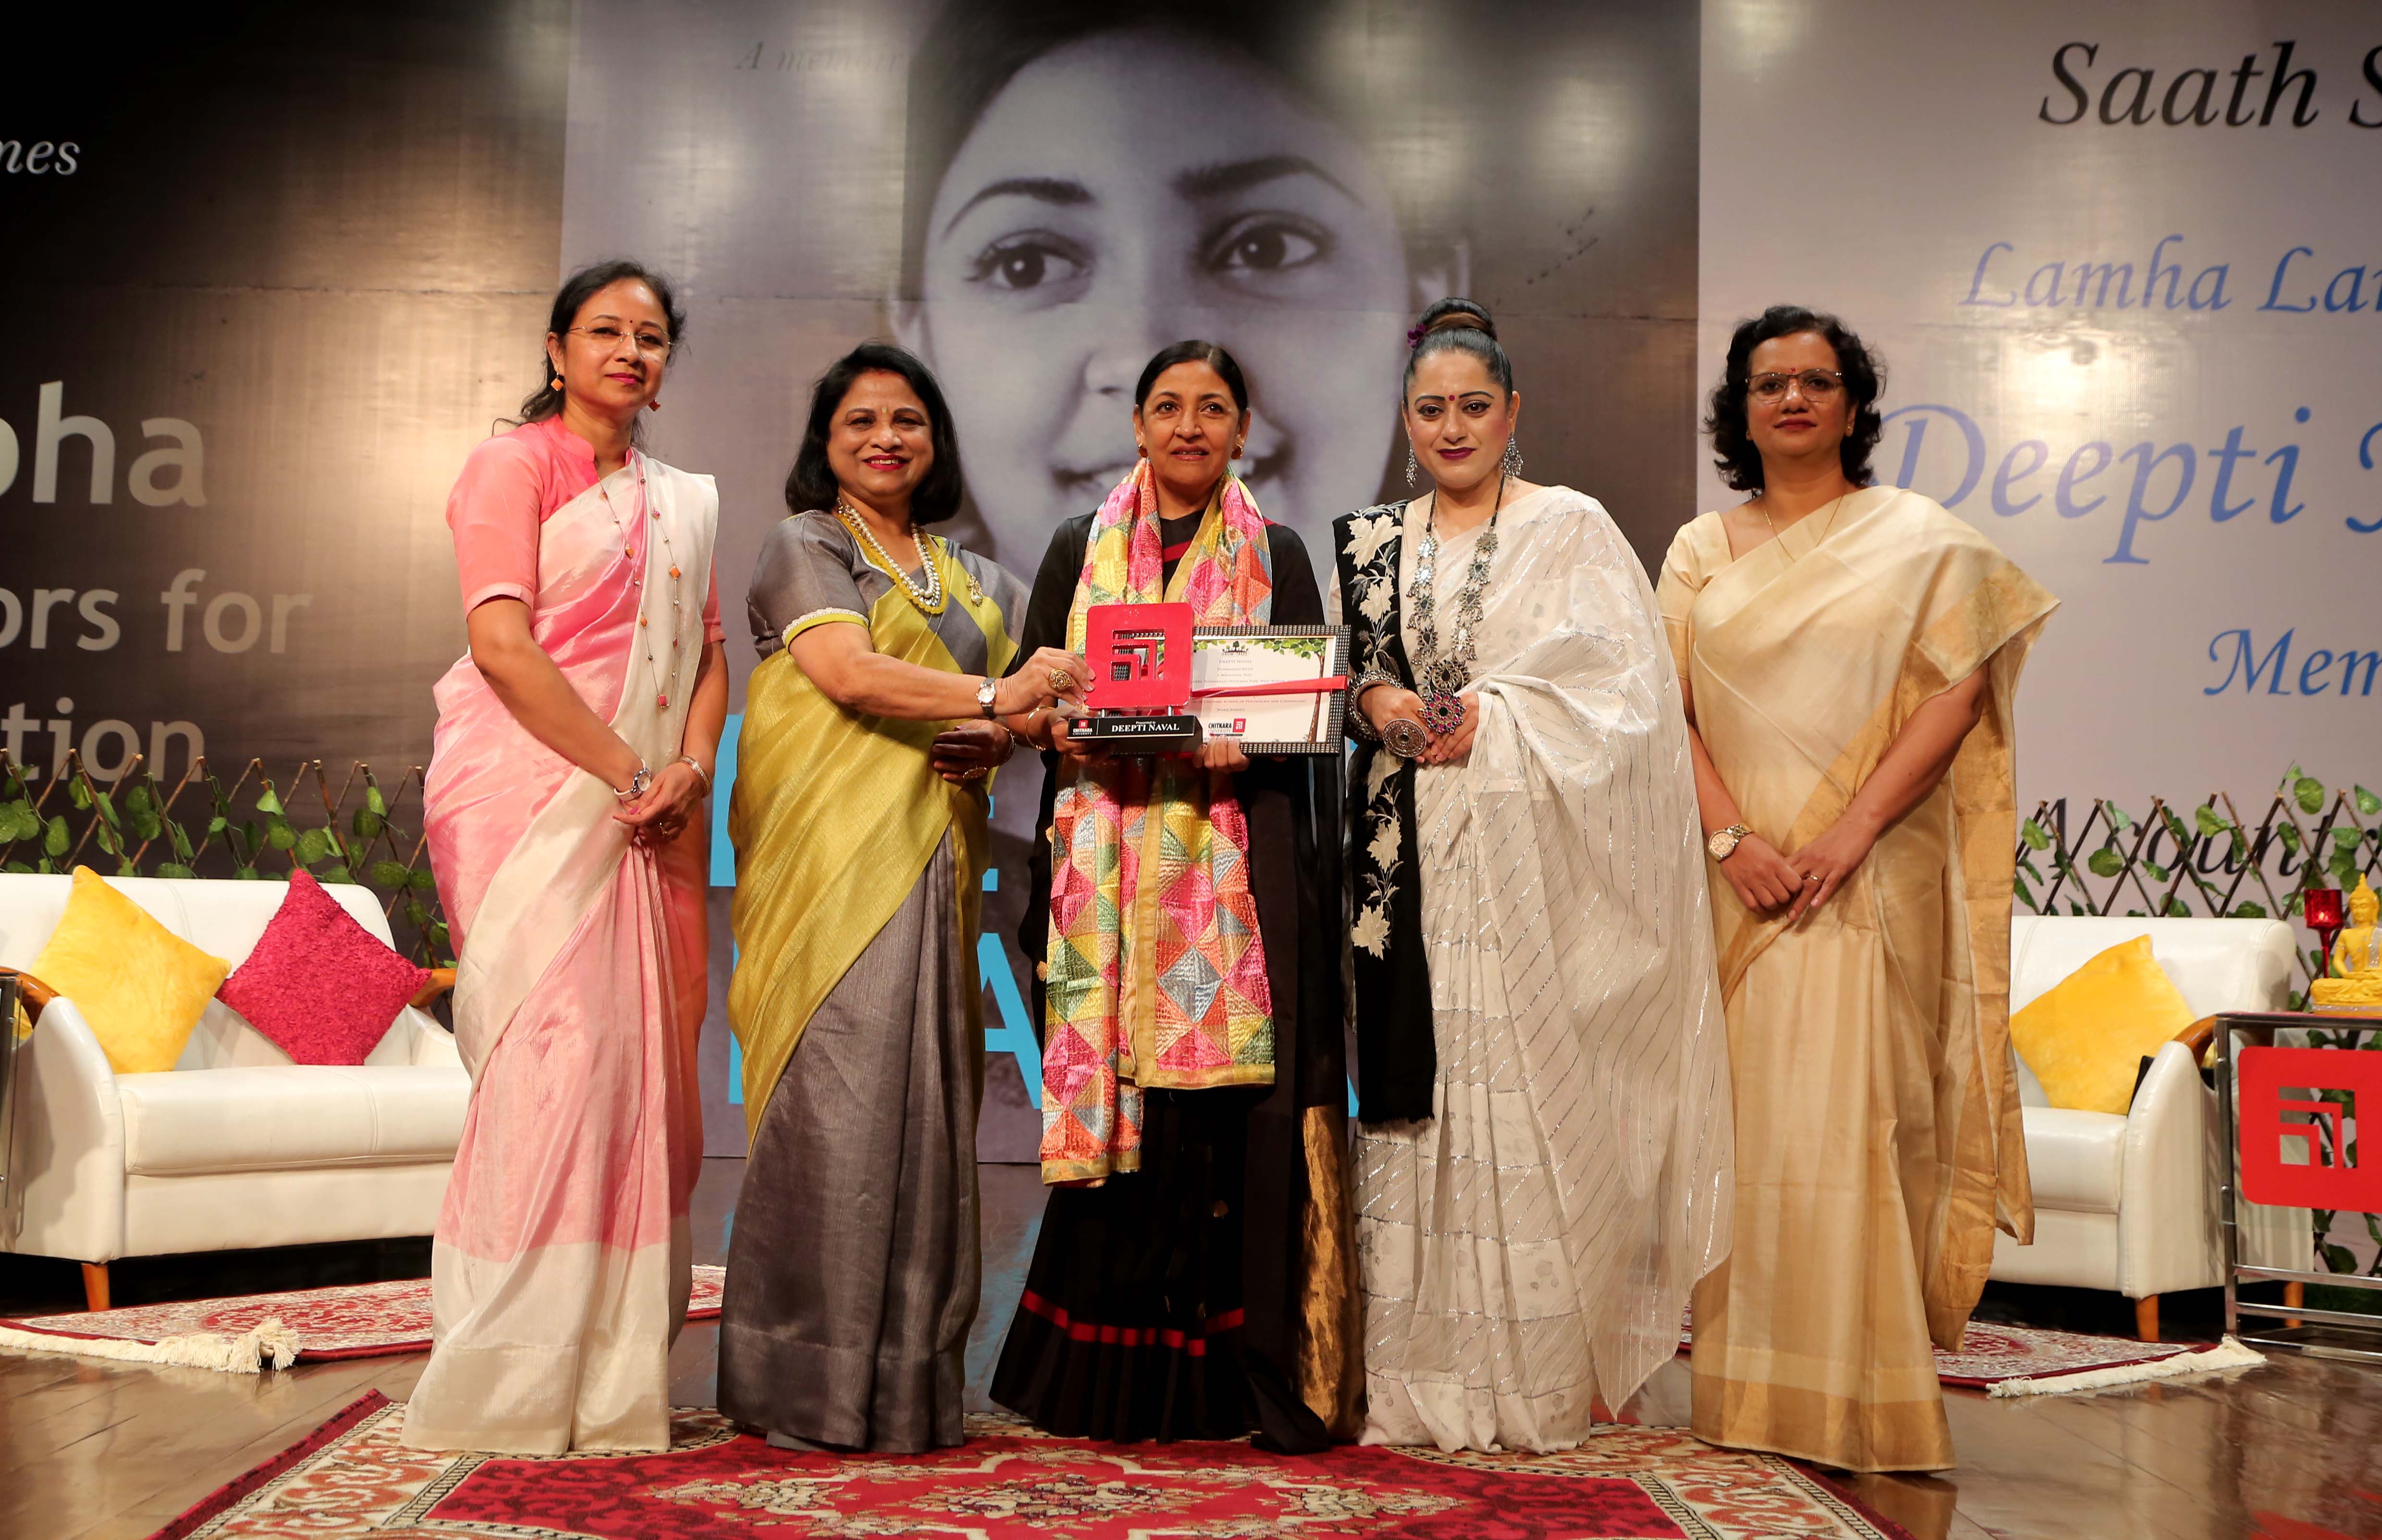 Chitkara Univesity’s  New Psychology Program Inaugurated by Deepti Naval and renowned Phychodramatist and Grapho Therapist